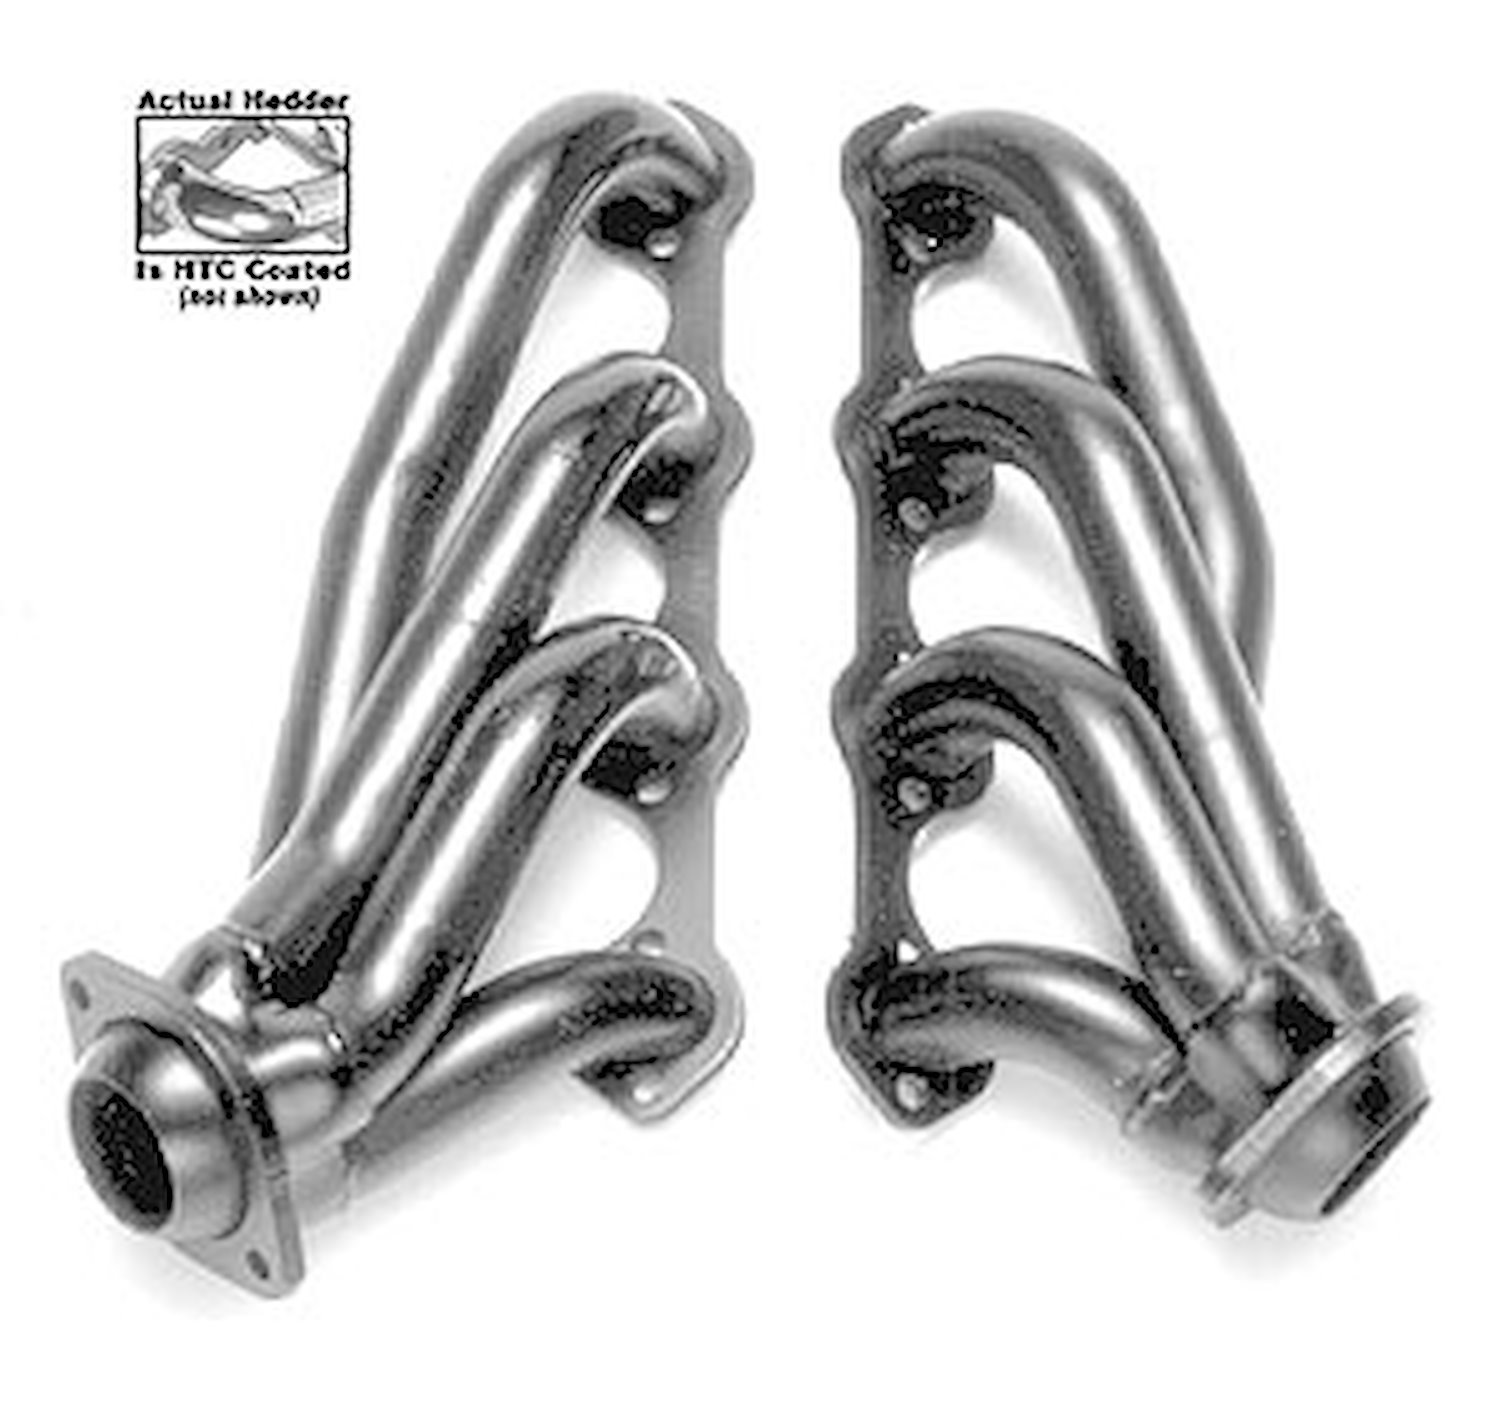 Standard Duty HTC Coated Shorty Headers 1986-93 Ford Mustang 5.0L